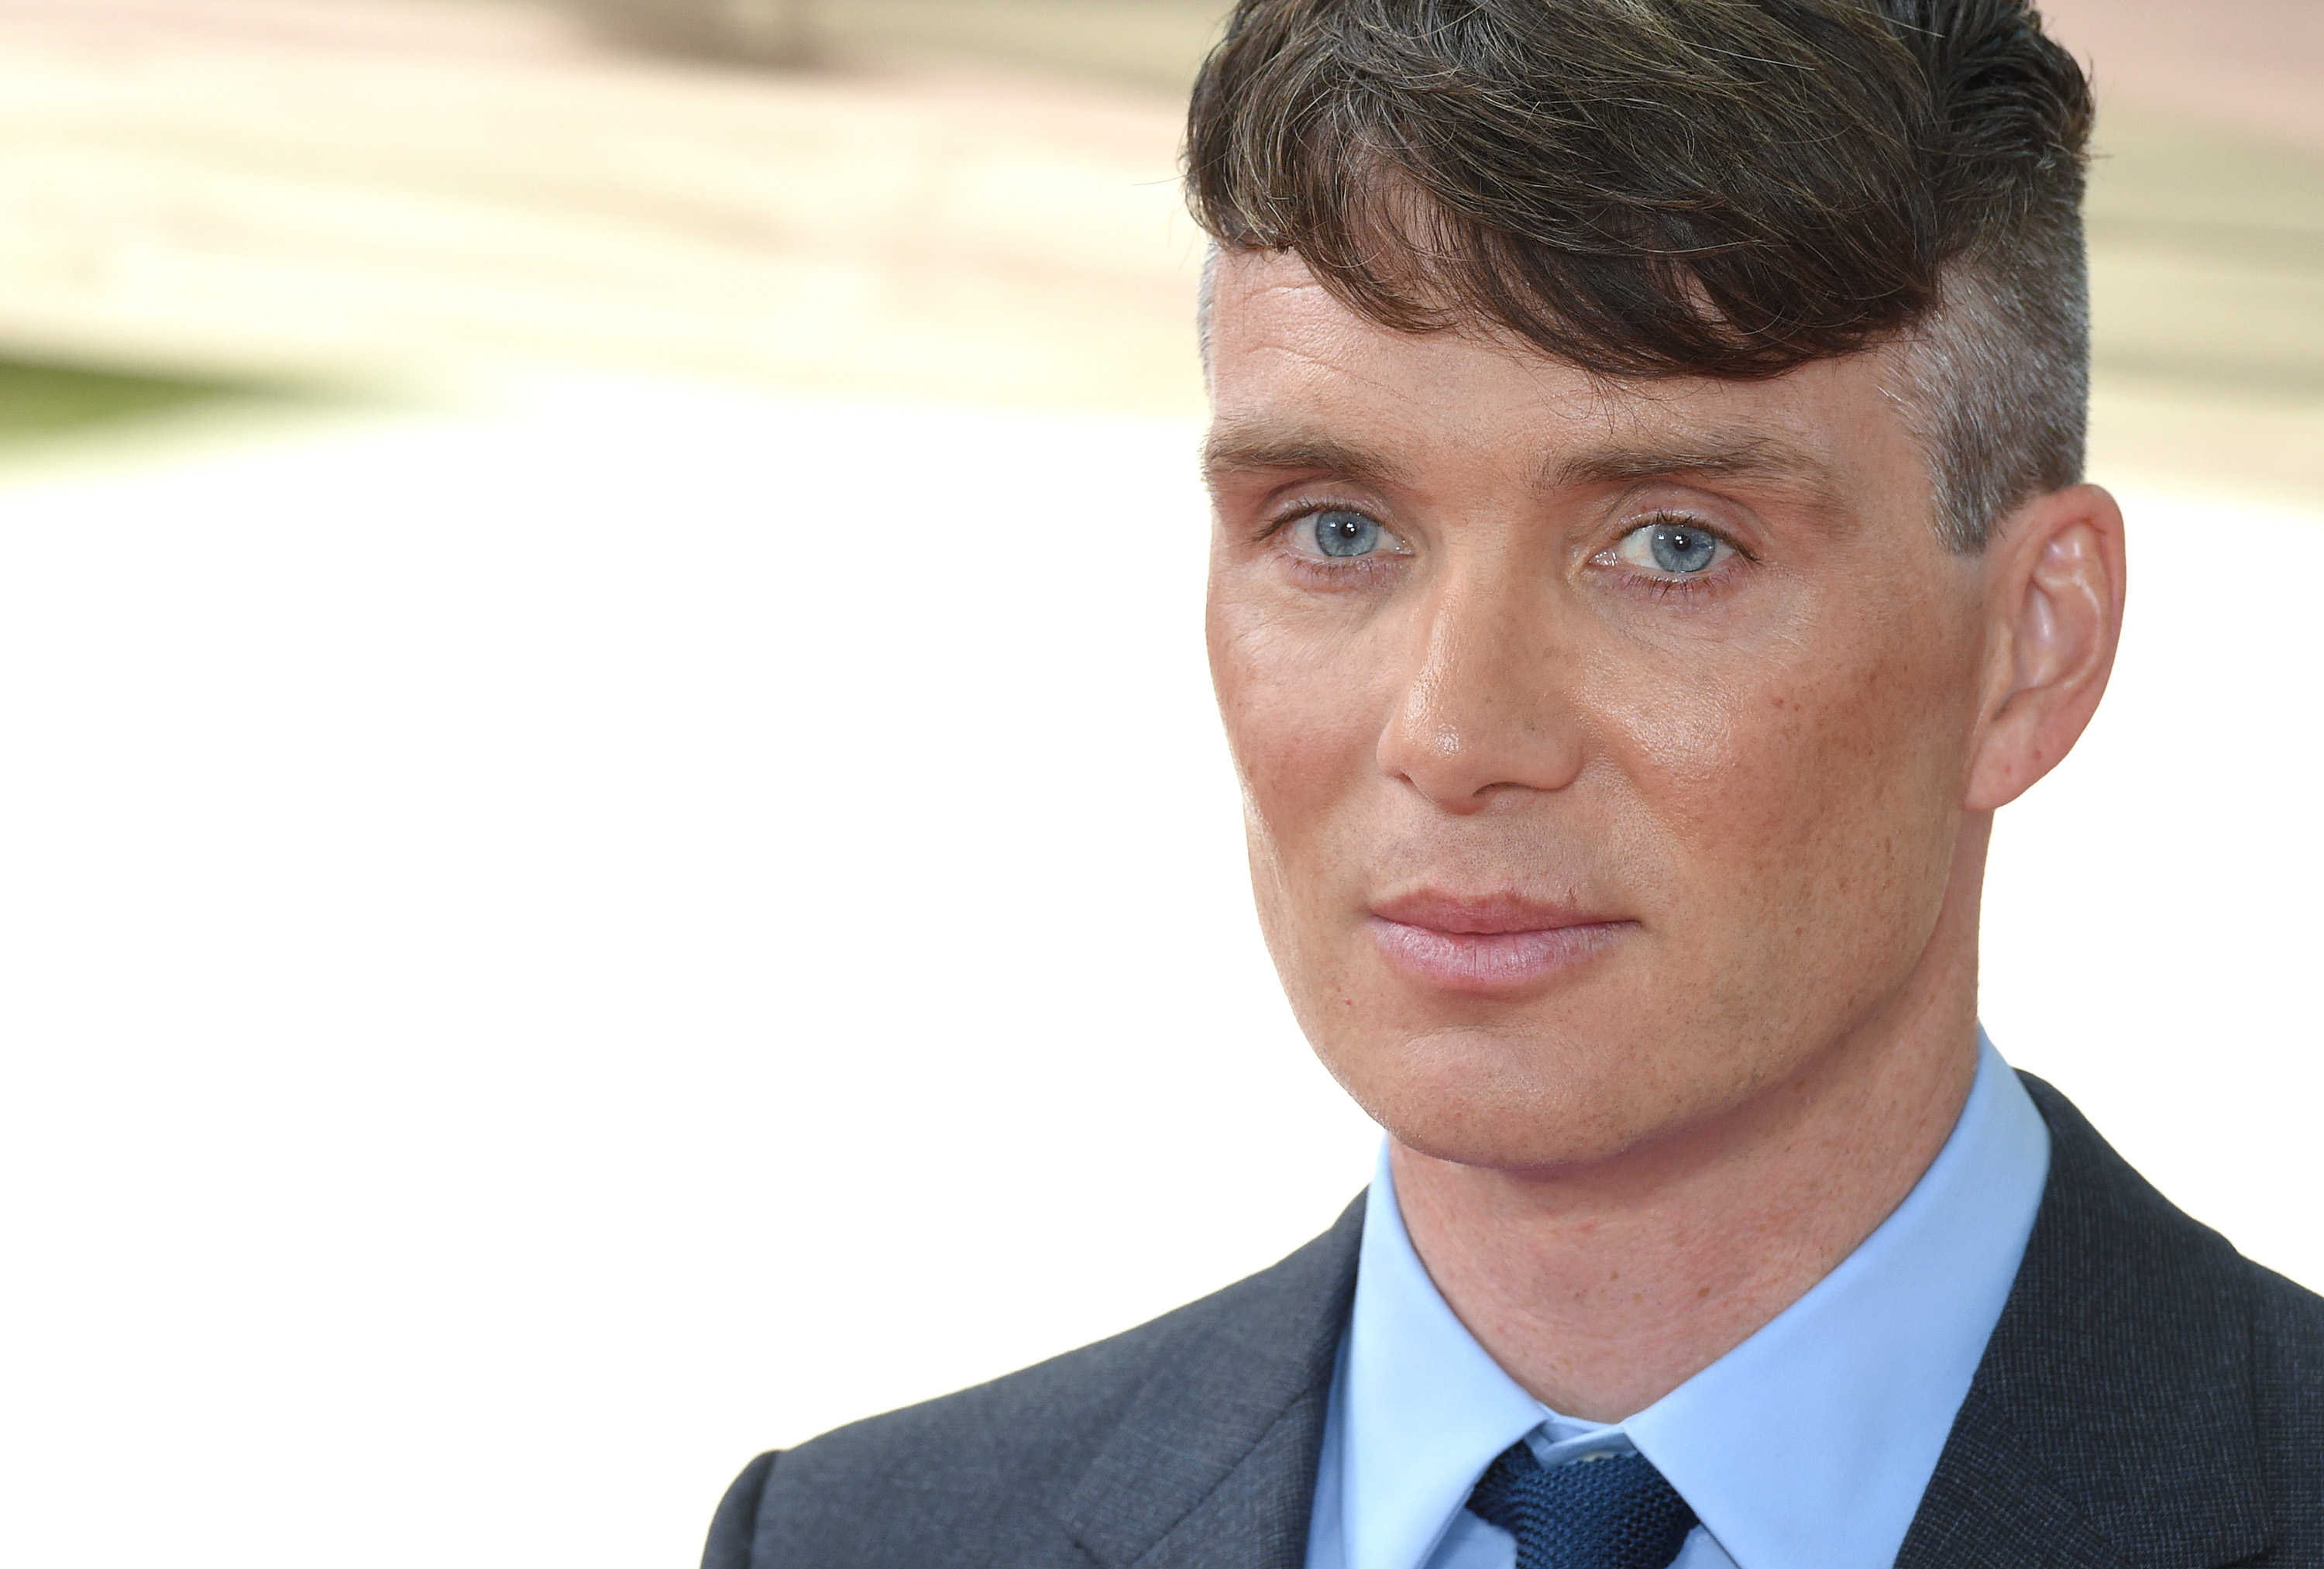 A close-up photo of Cillian Murphy with very blue eyes in a suit.